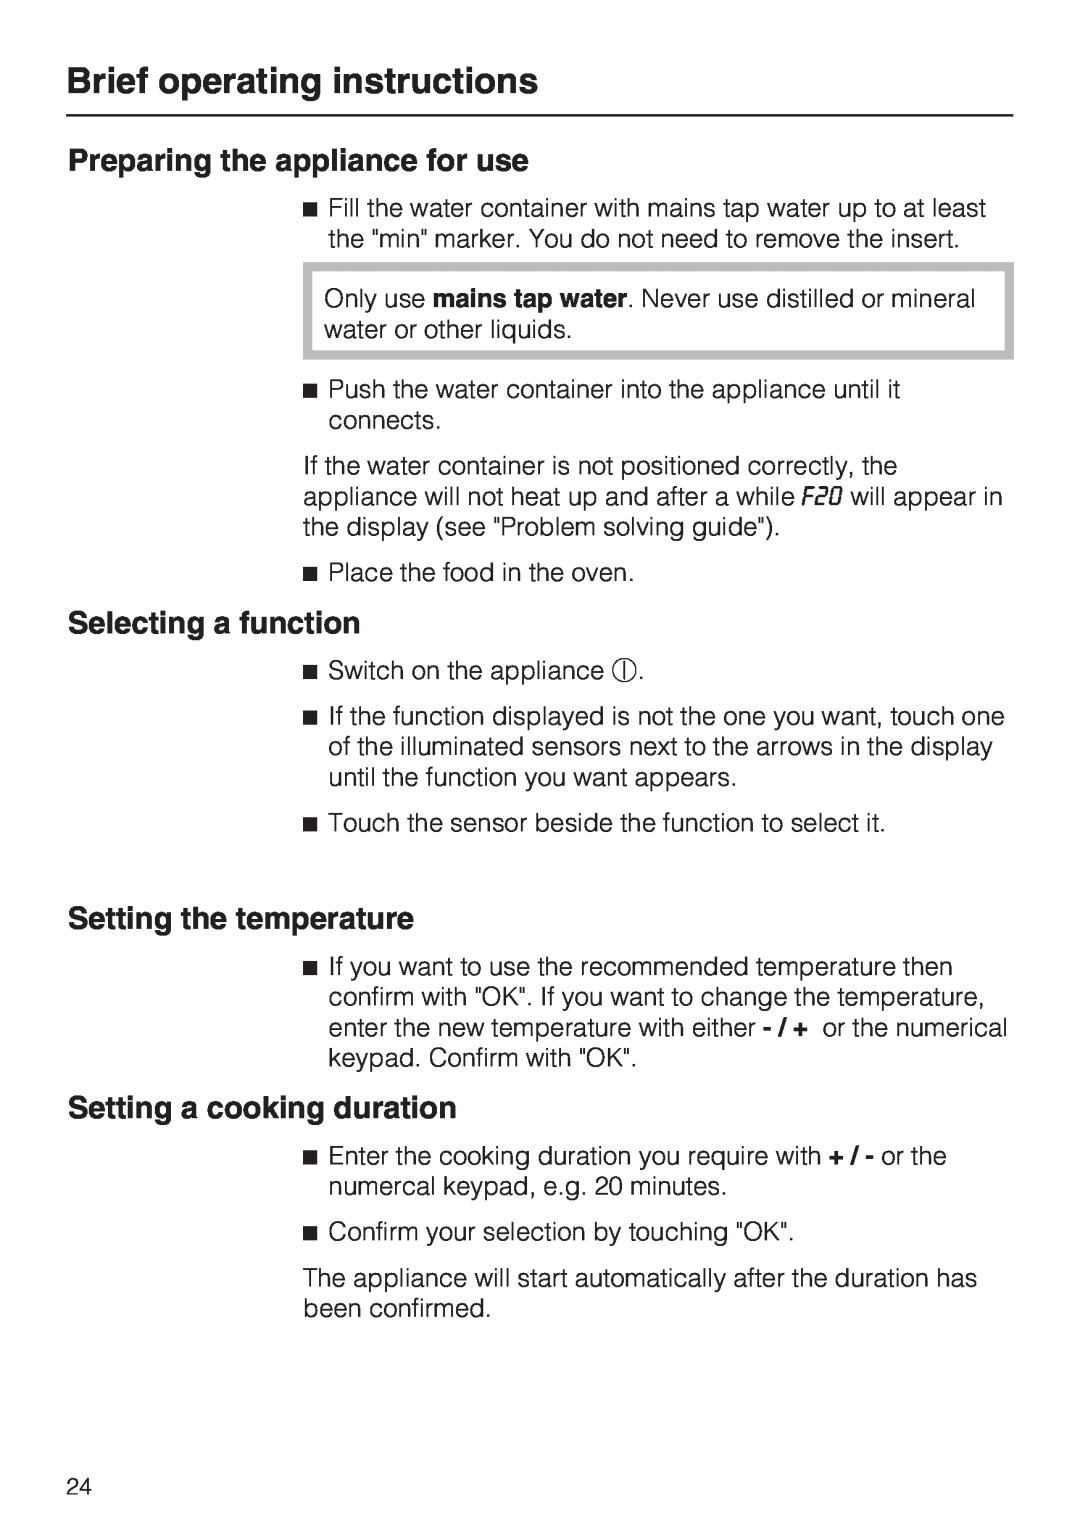 Miele DG 5070 Brief operating instructions, Preparing the appliance for use, Selecting a function, Setting the temperature 